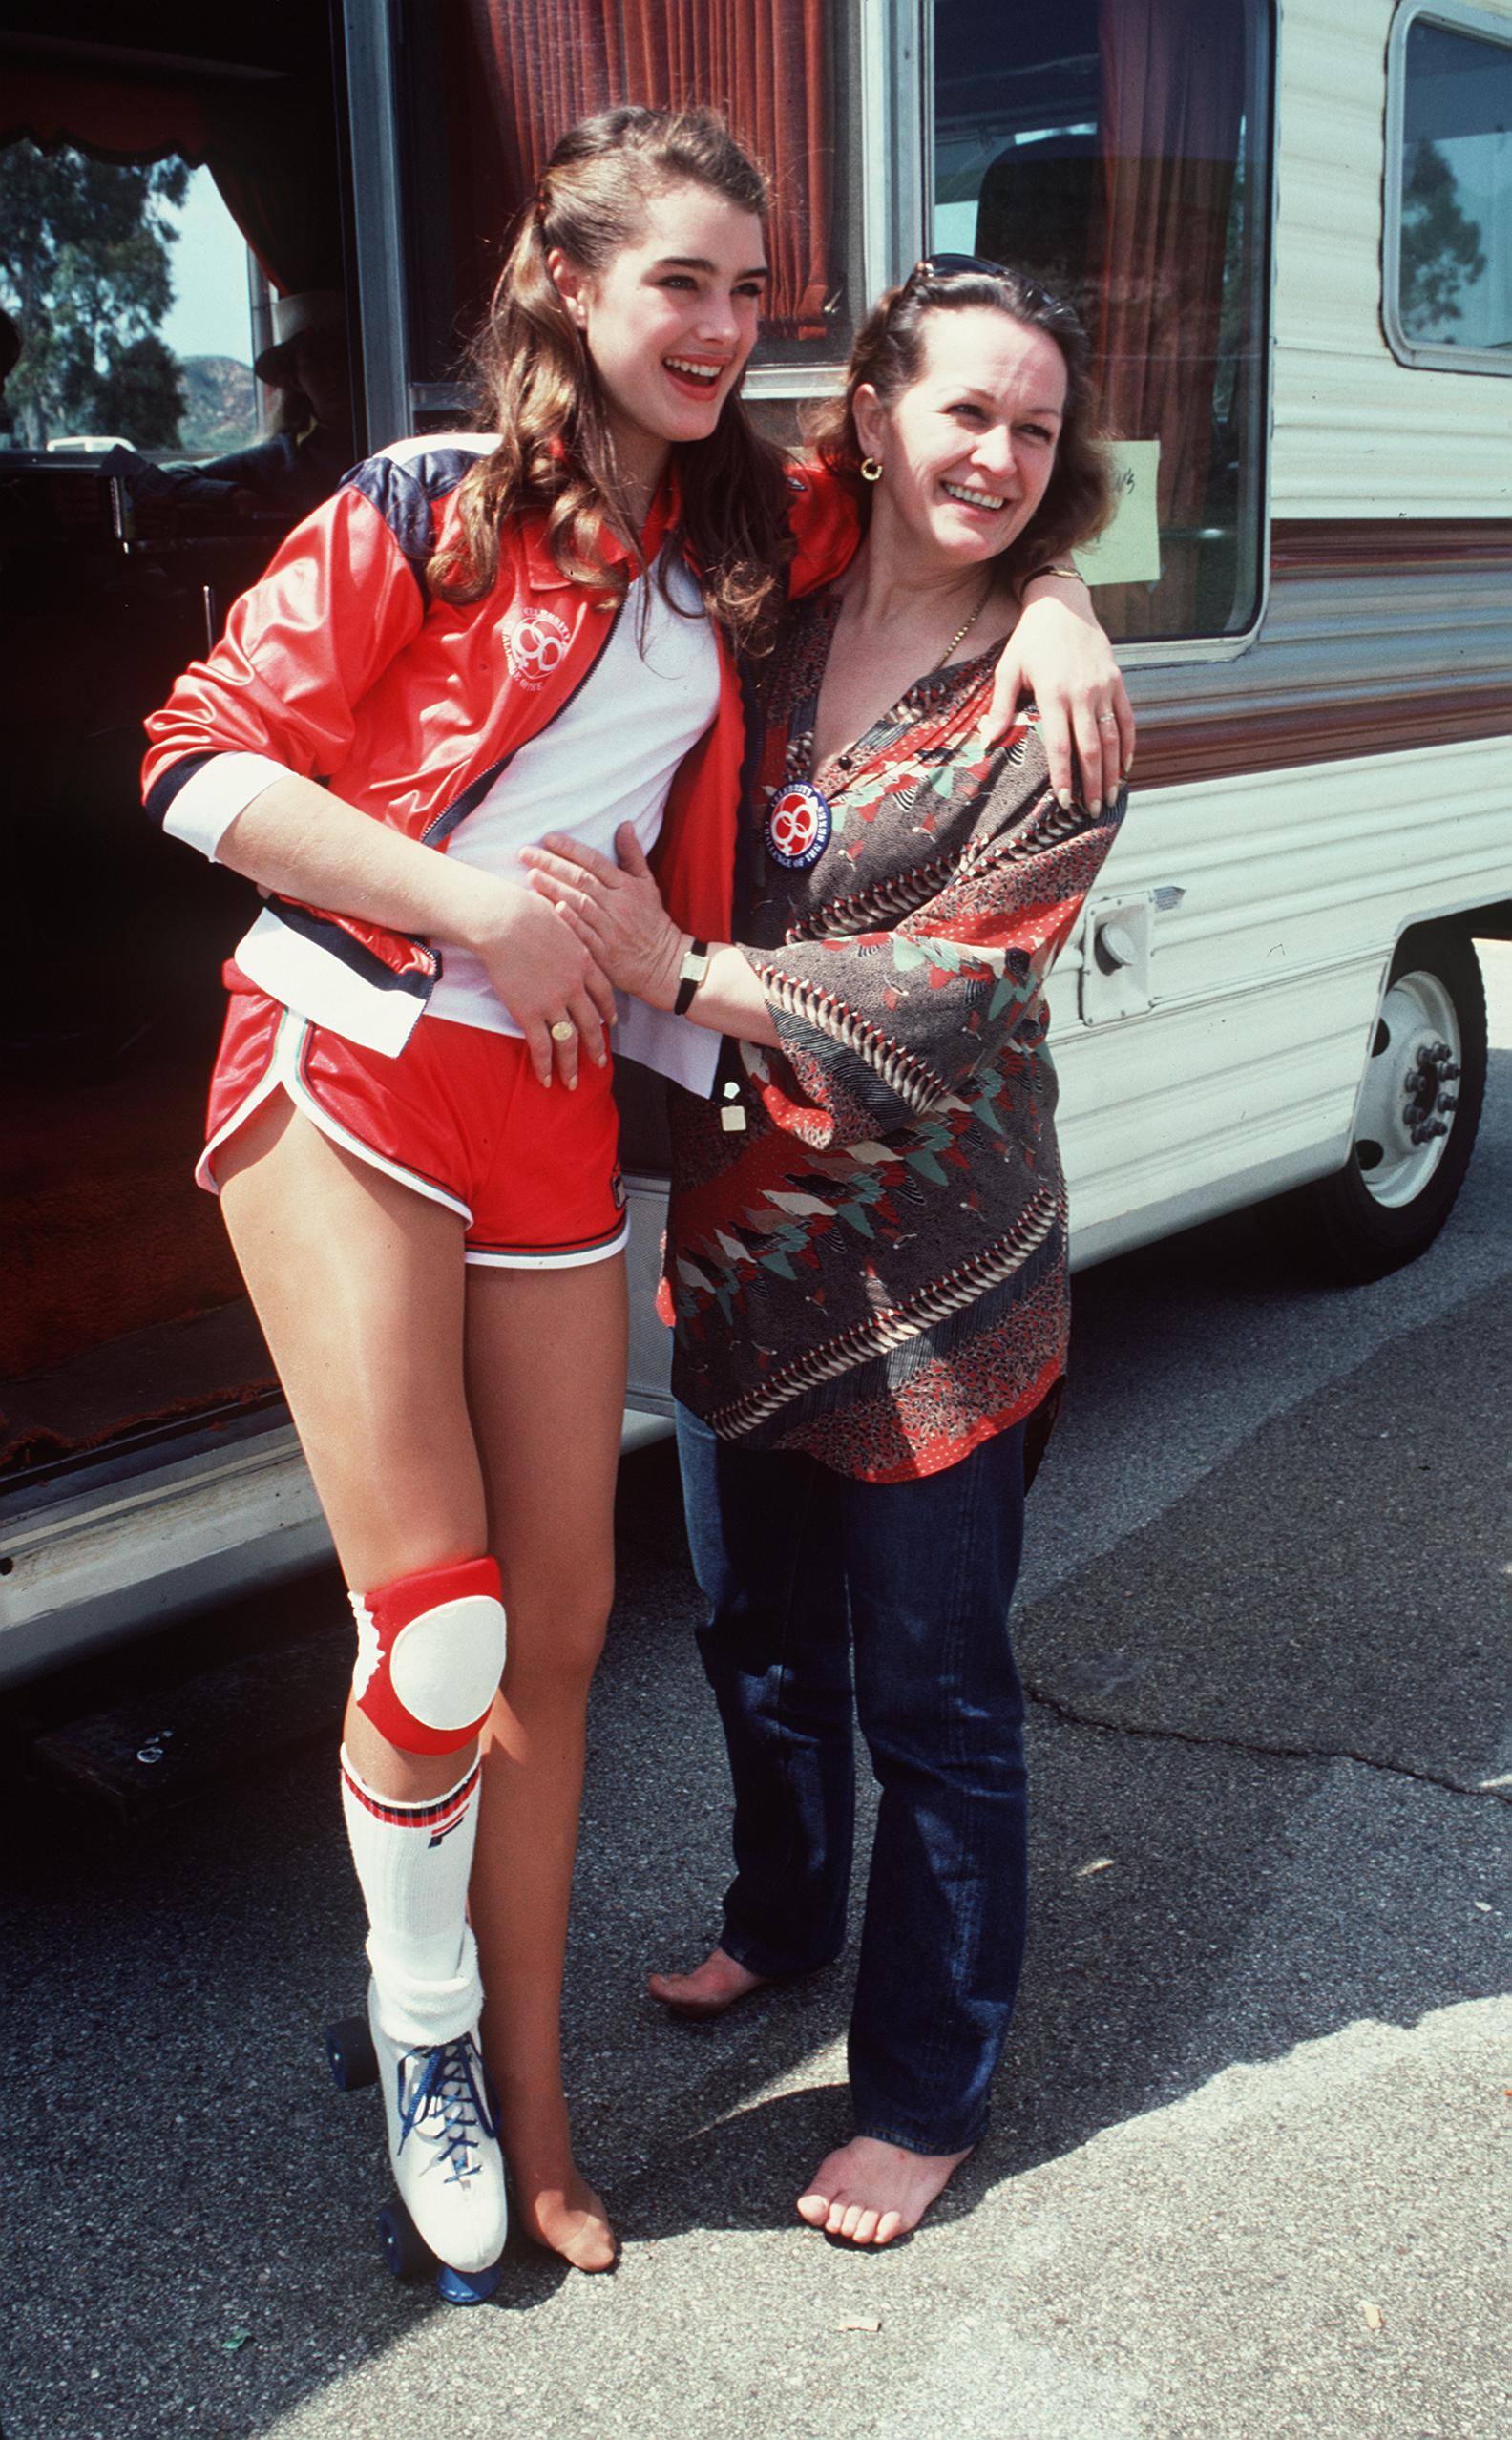 PHOTO: Brooke Shields and her mother Teri Shields are seen on the set of a television show in the 1980s.